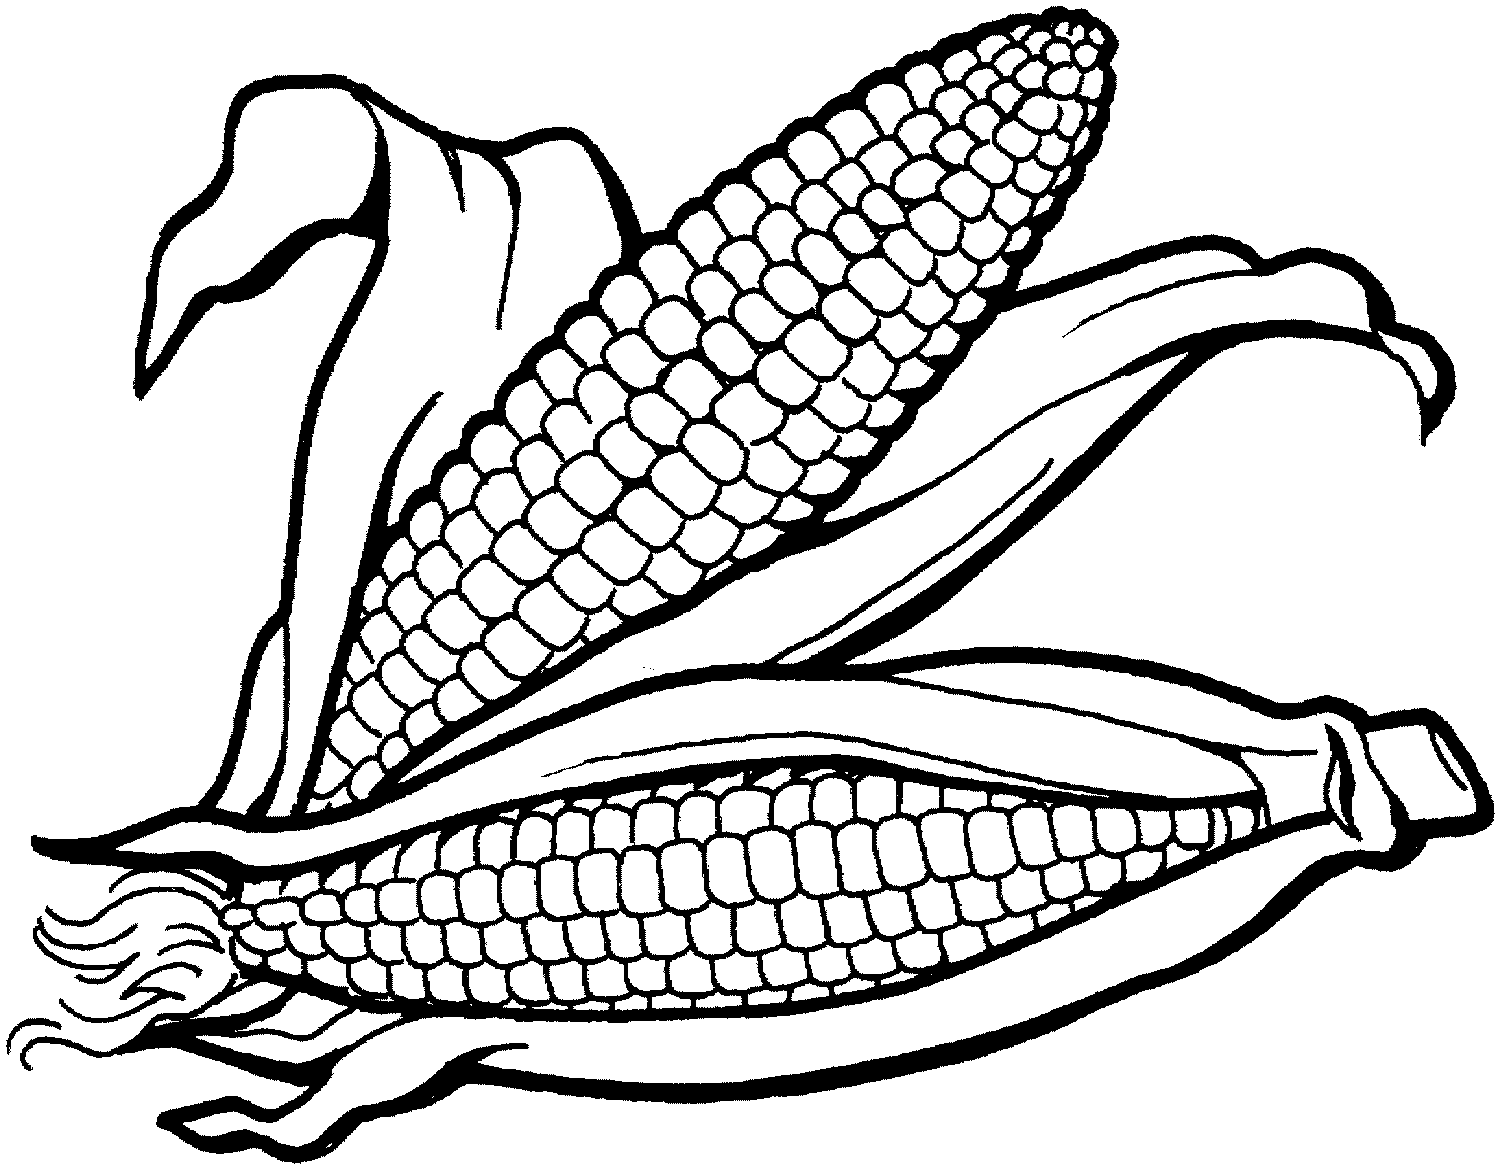 Corn Clipart Black And White | Clipart Panda - Free Clipart Images